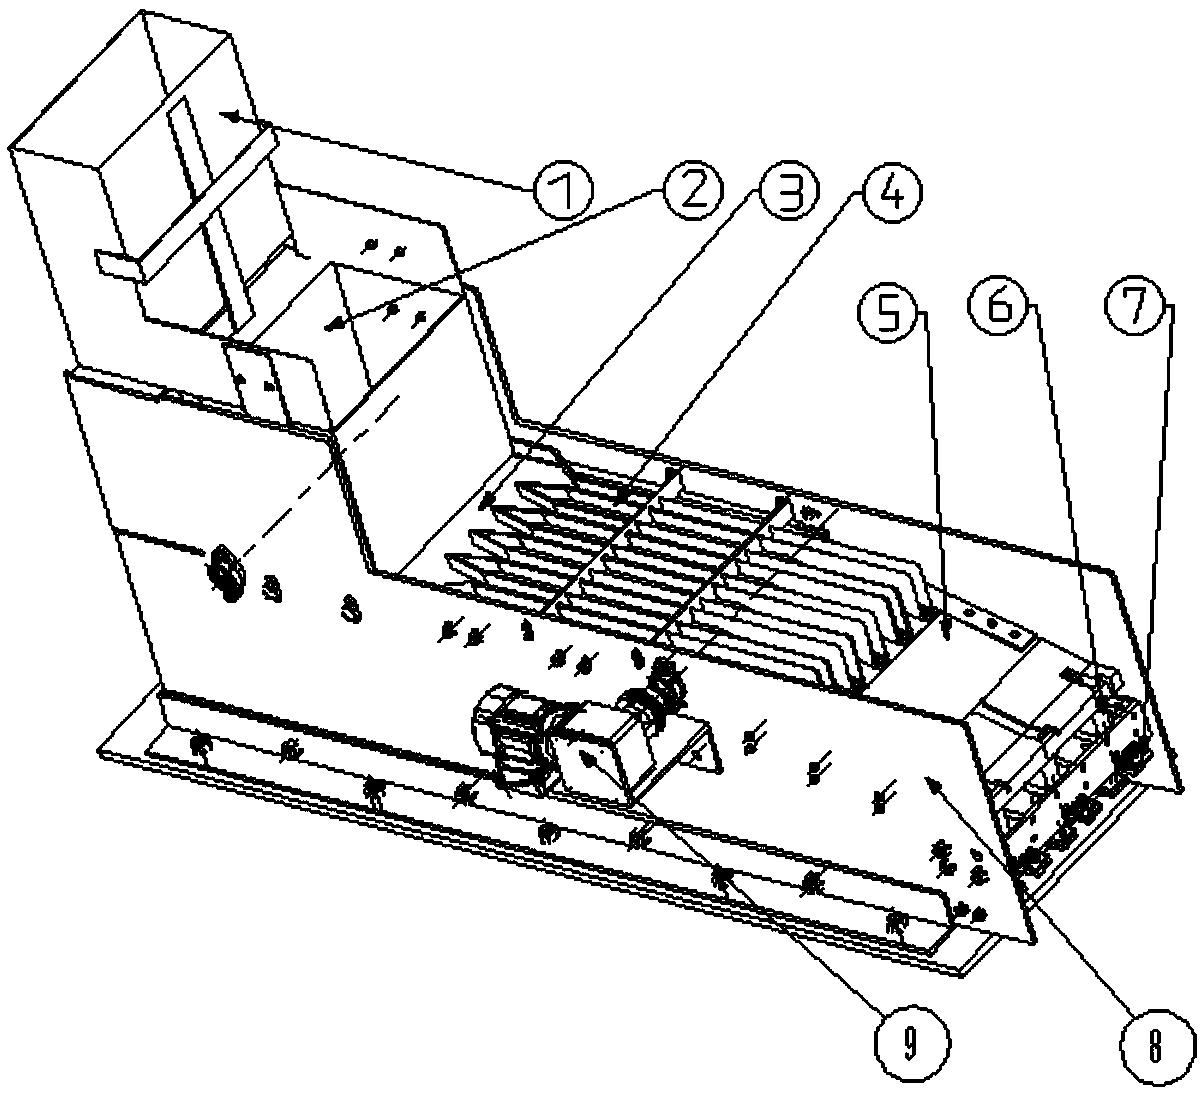 Intelligent coin sorting, counting and variable packaging integrated device